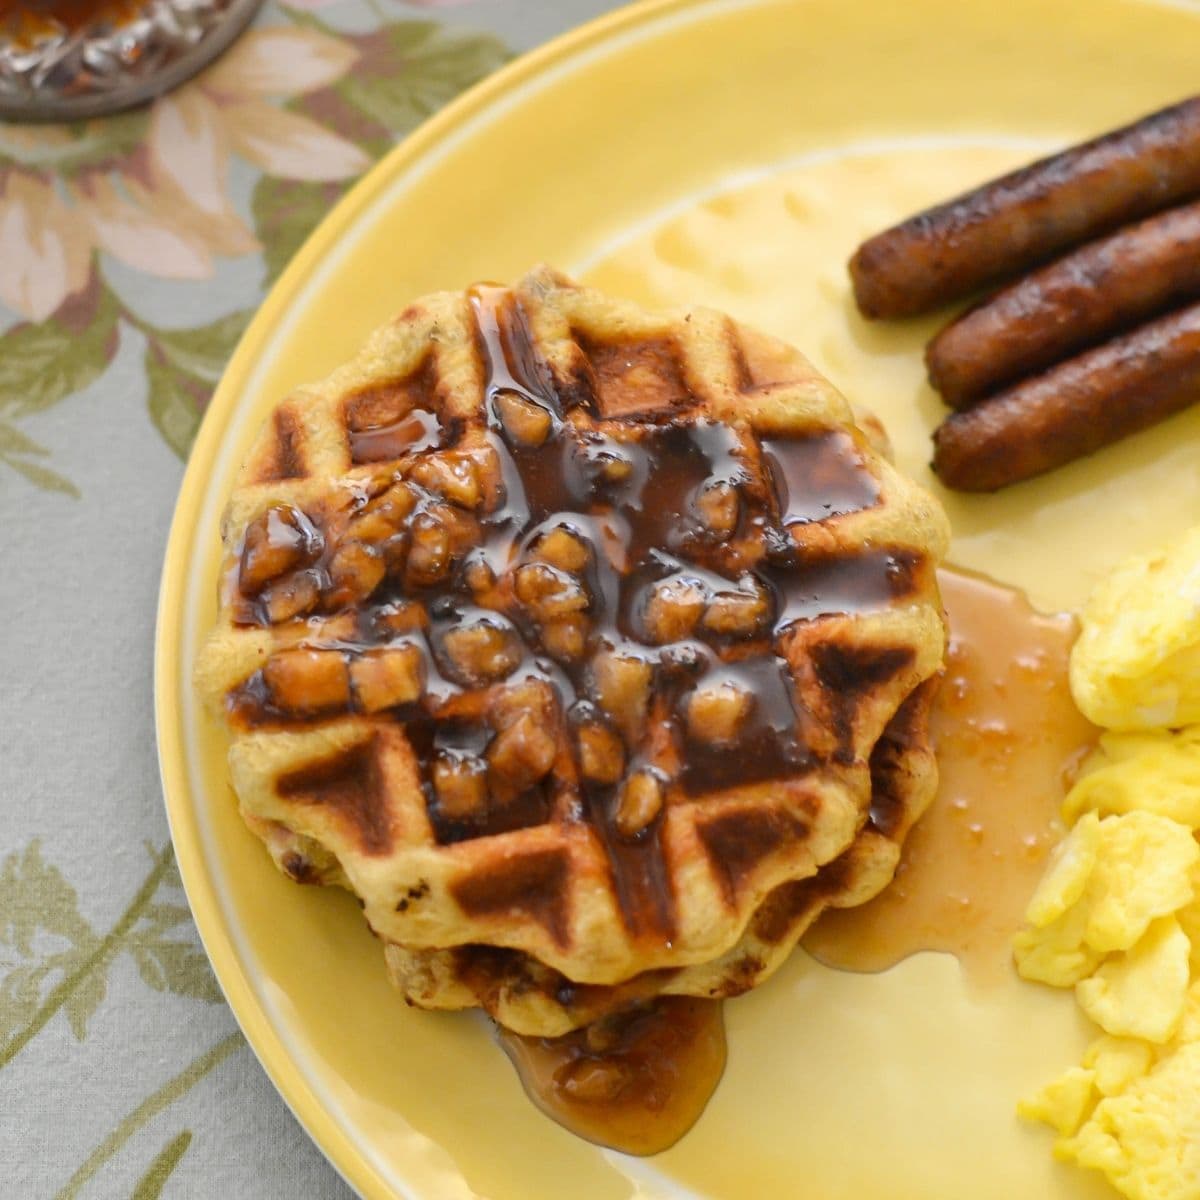 Apple Cinnamon Roll waffles on a plate with sausage links and scrambled eggs.